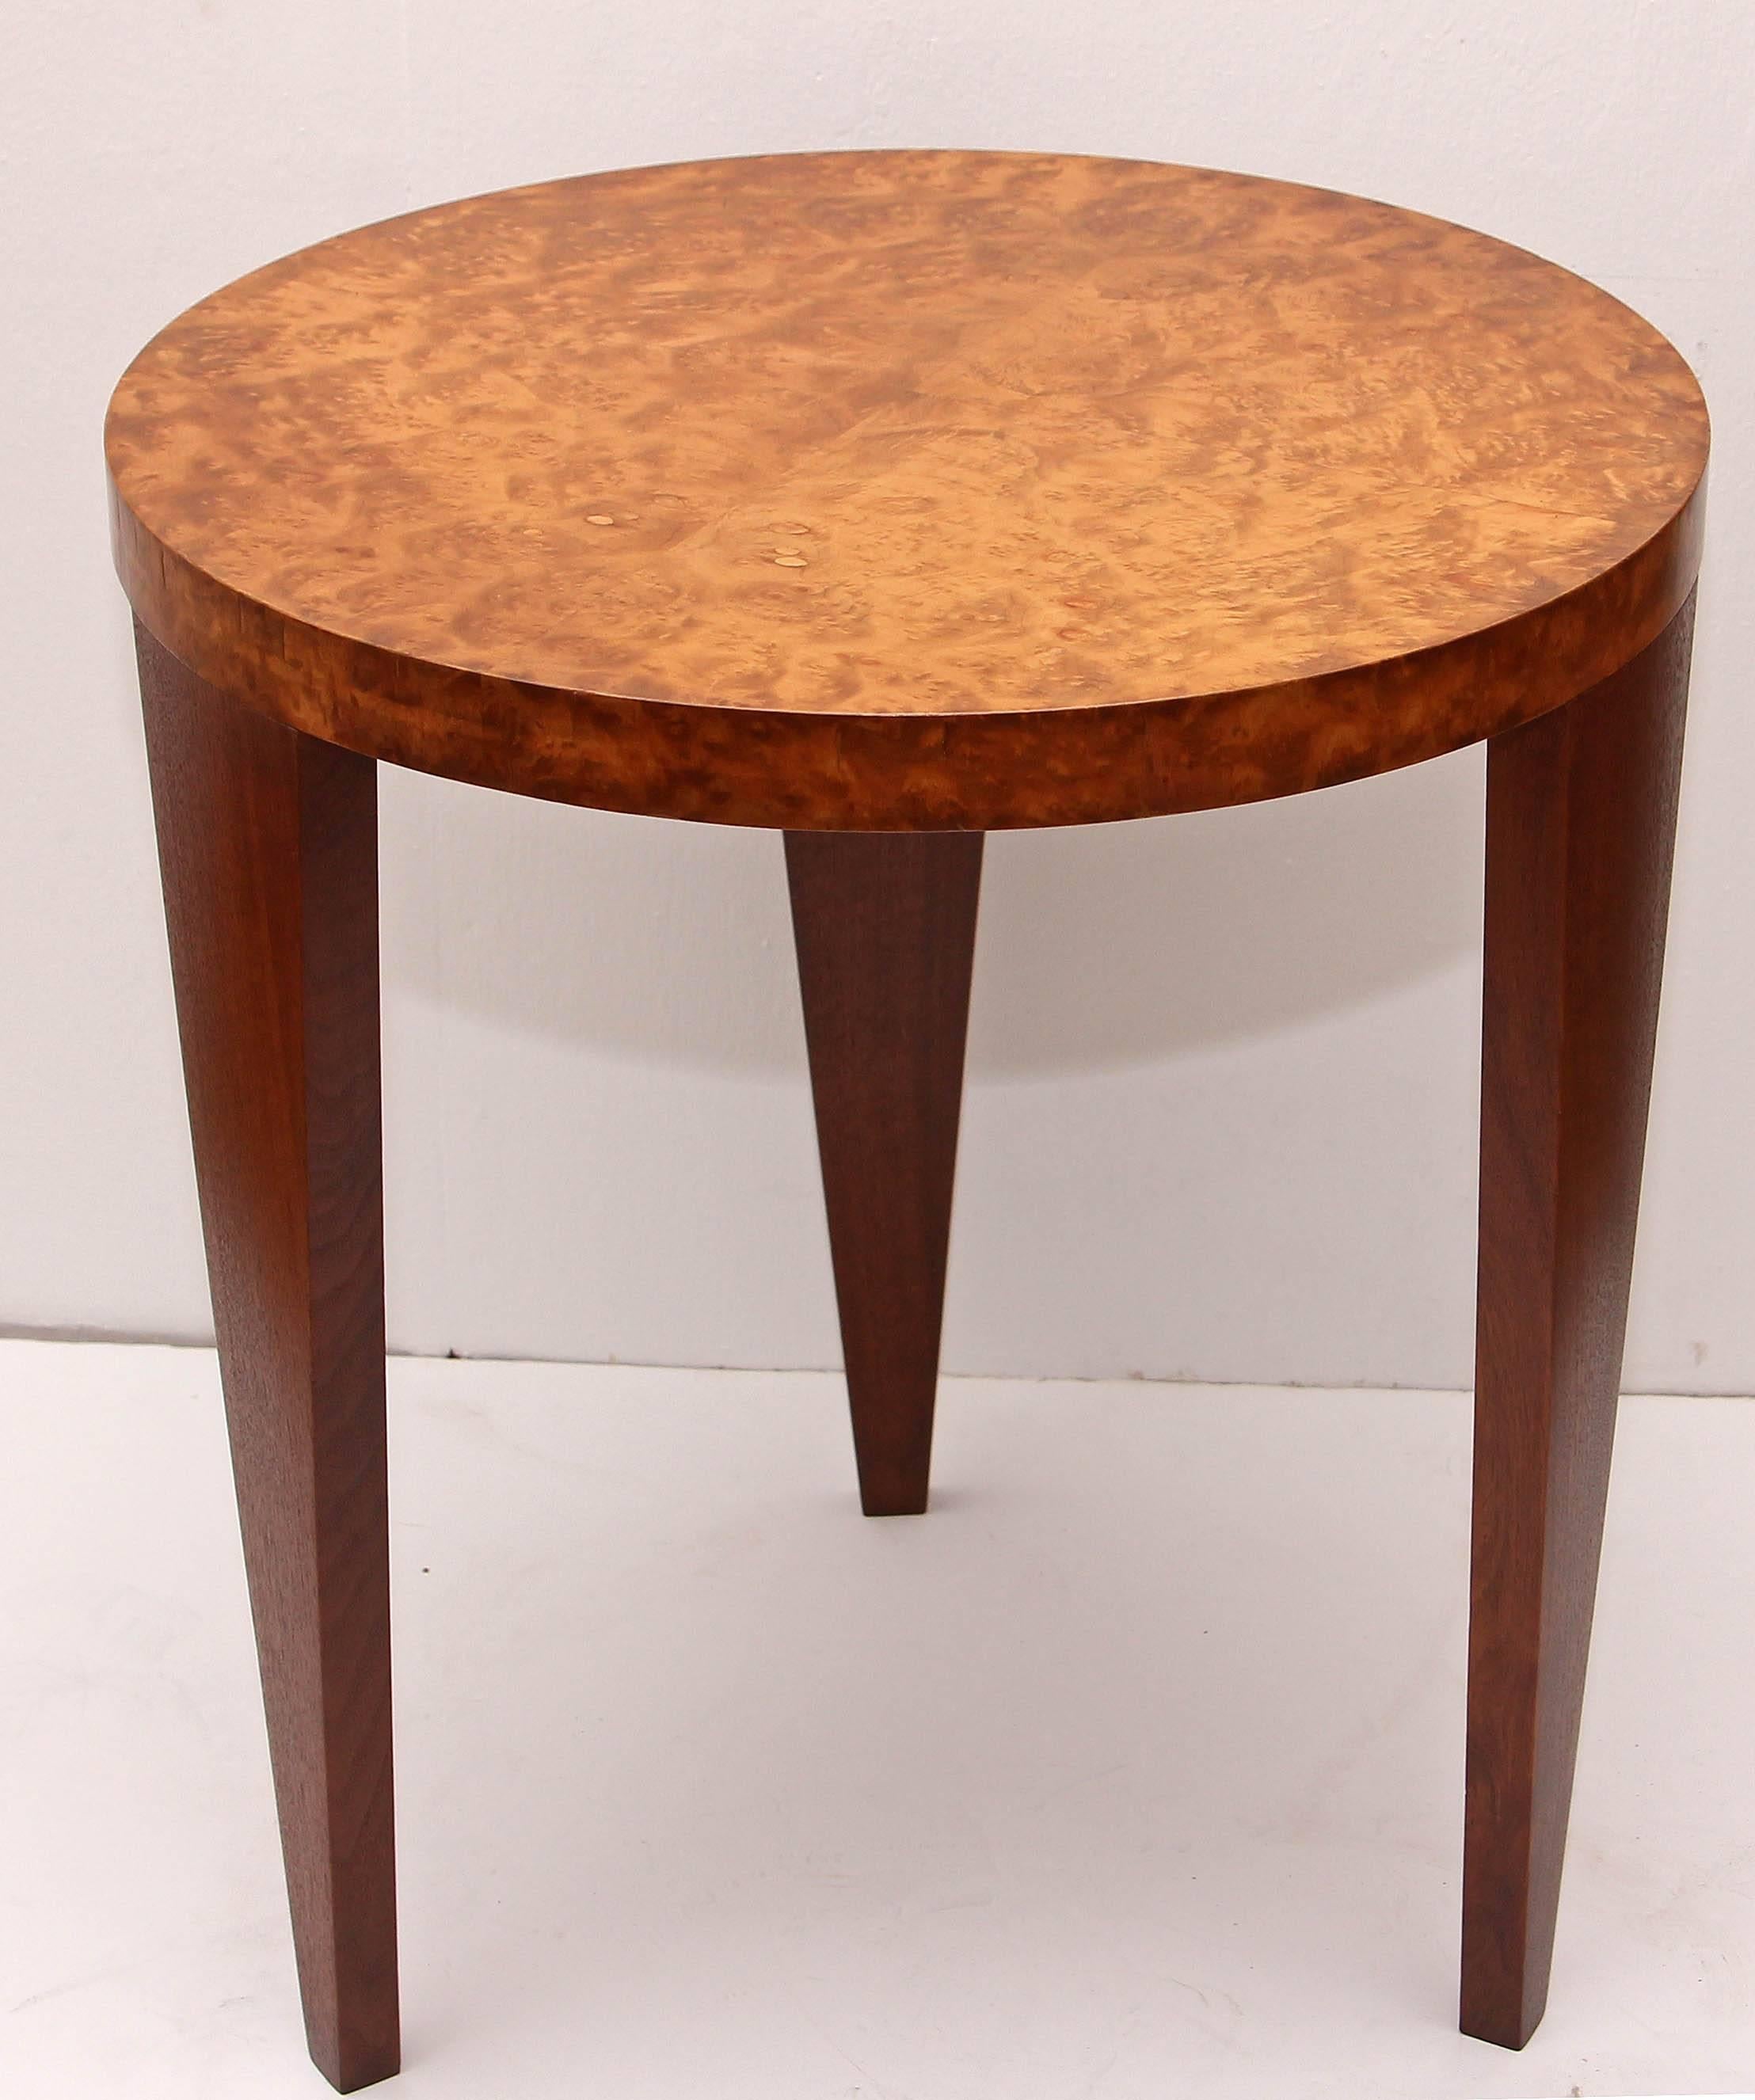 African influenced round side table by master craftsman Andrew Szoeke. Highly figured burled maple top and wenge legs. Szoeke’s work is sought after for it's quality of craftsmanship and use of exotic woods. Provenance: Estate of Thomas